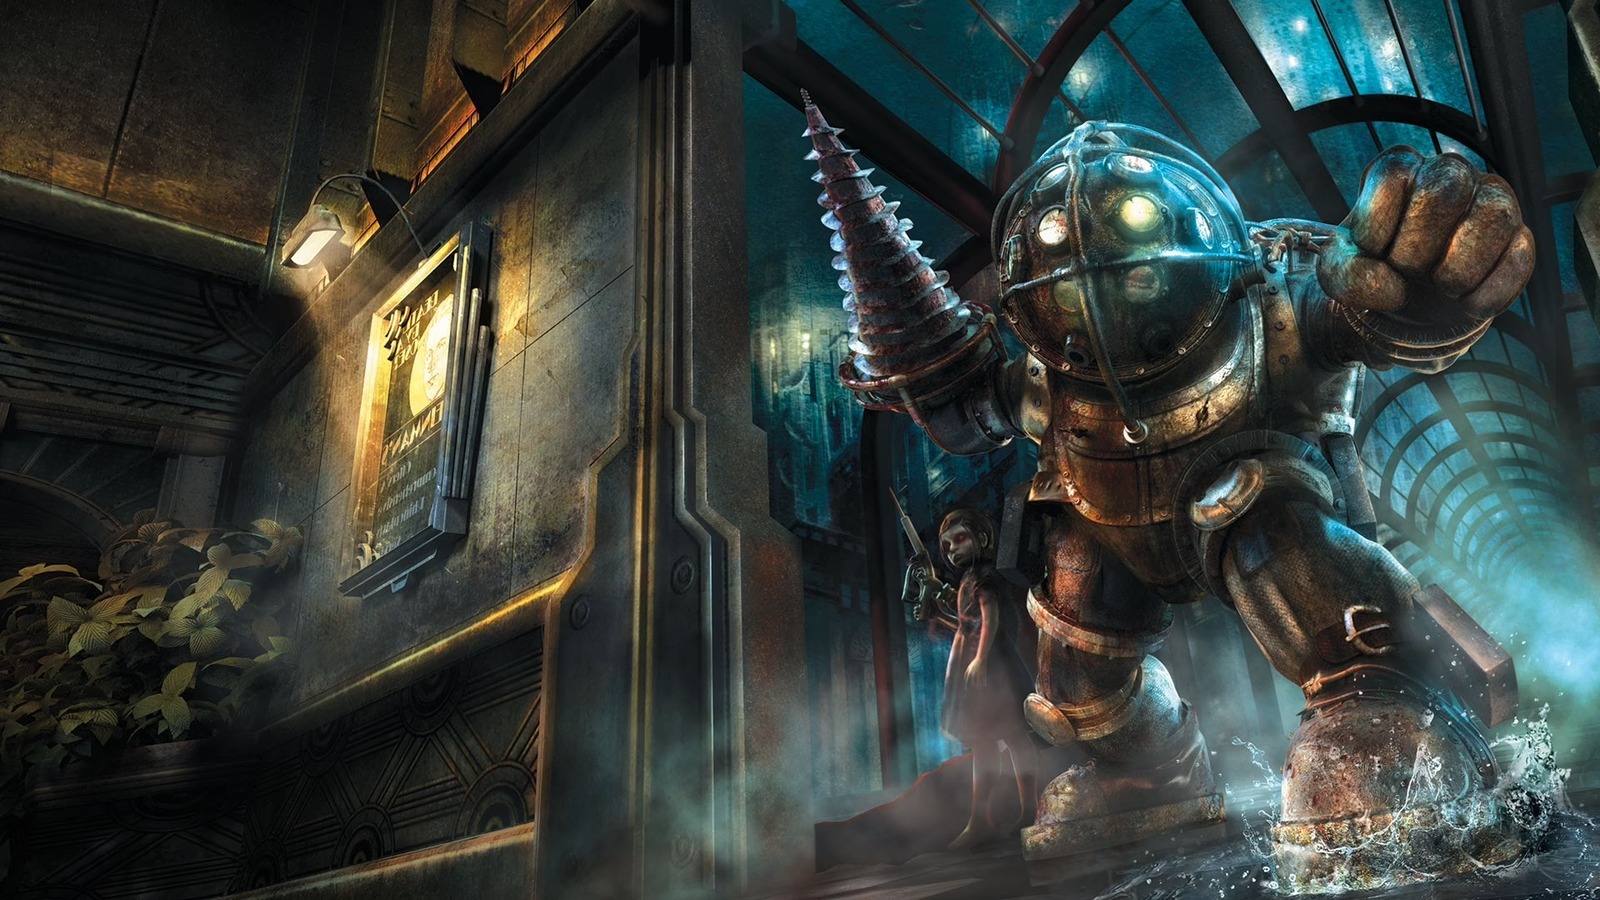 BioShock Director Francis Lawrence Explains What Drew Him To The Adaptation: 'It's One Of The Best Games Ever Created'